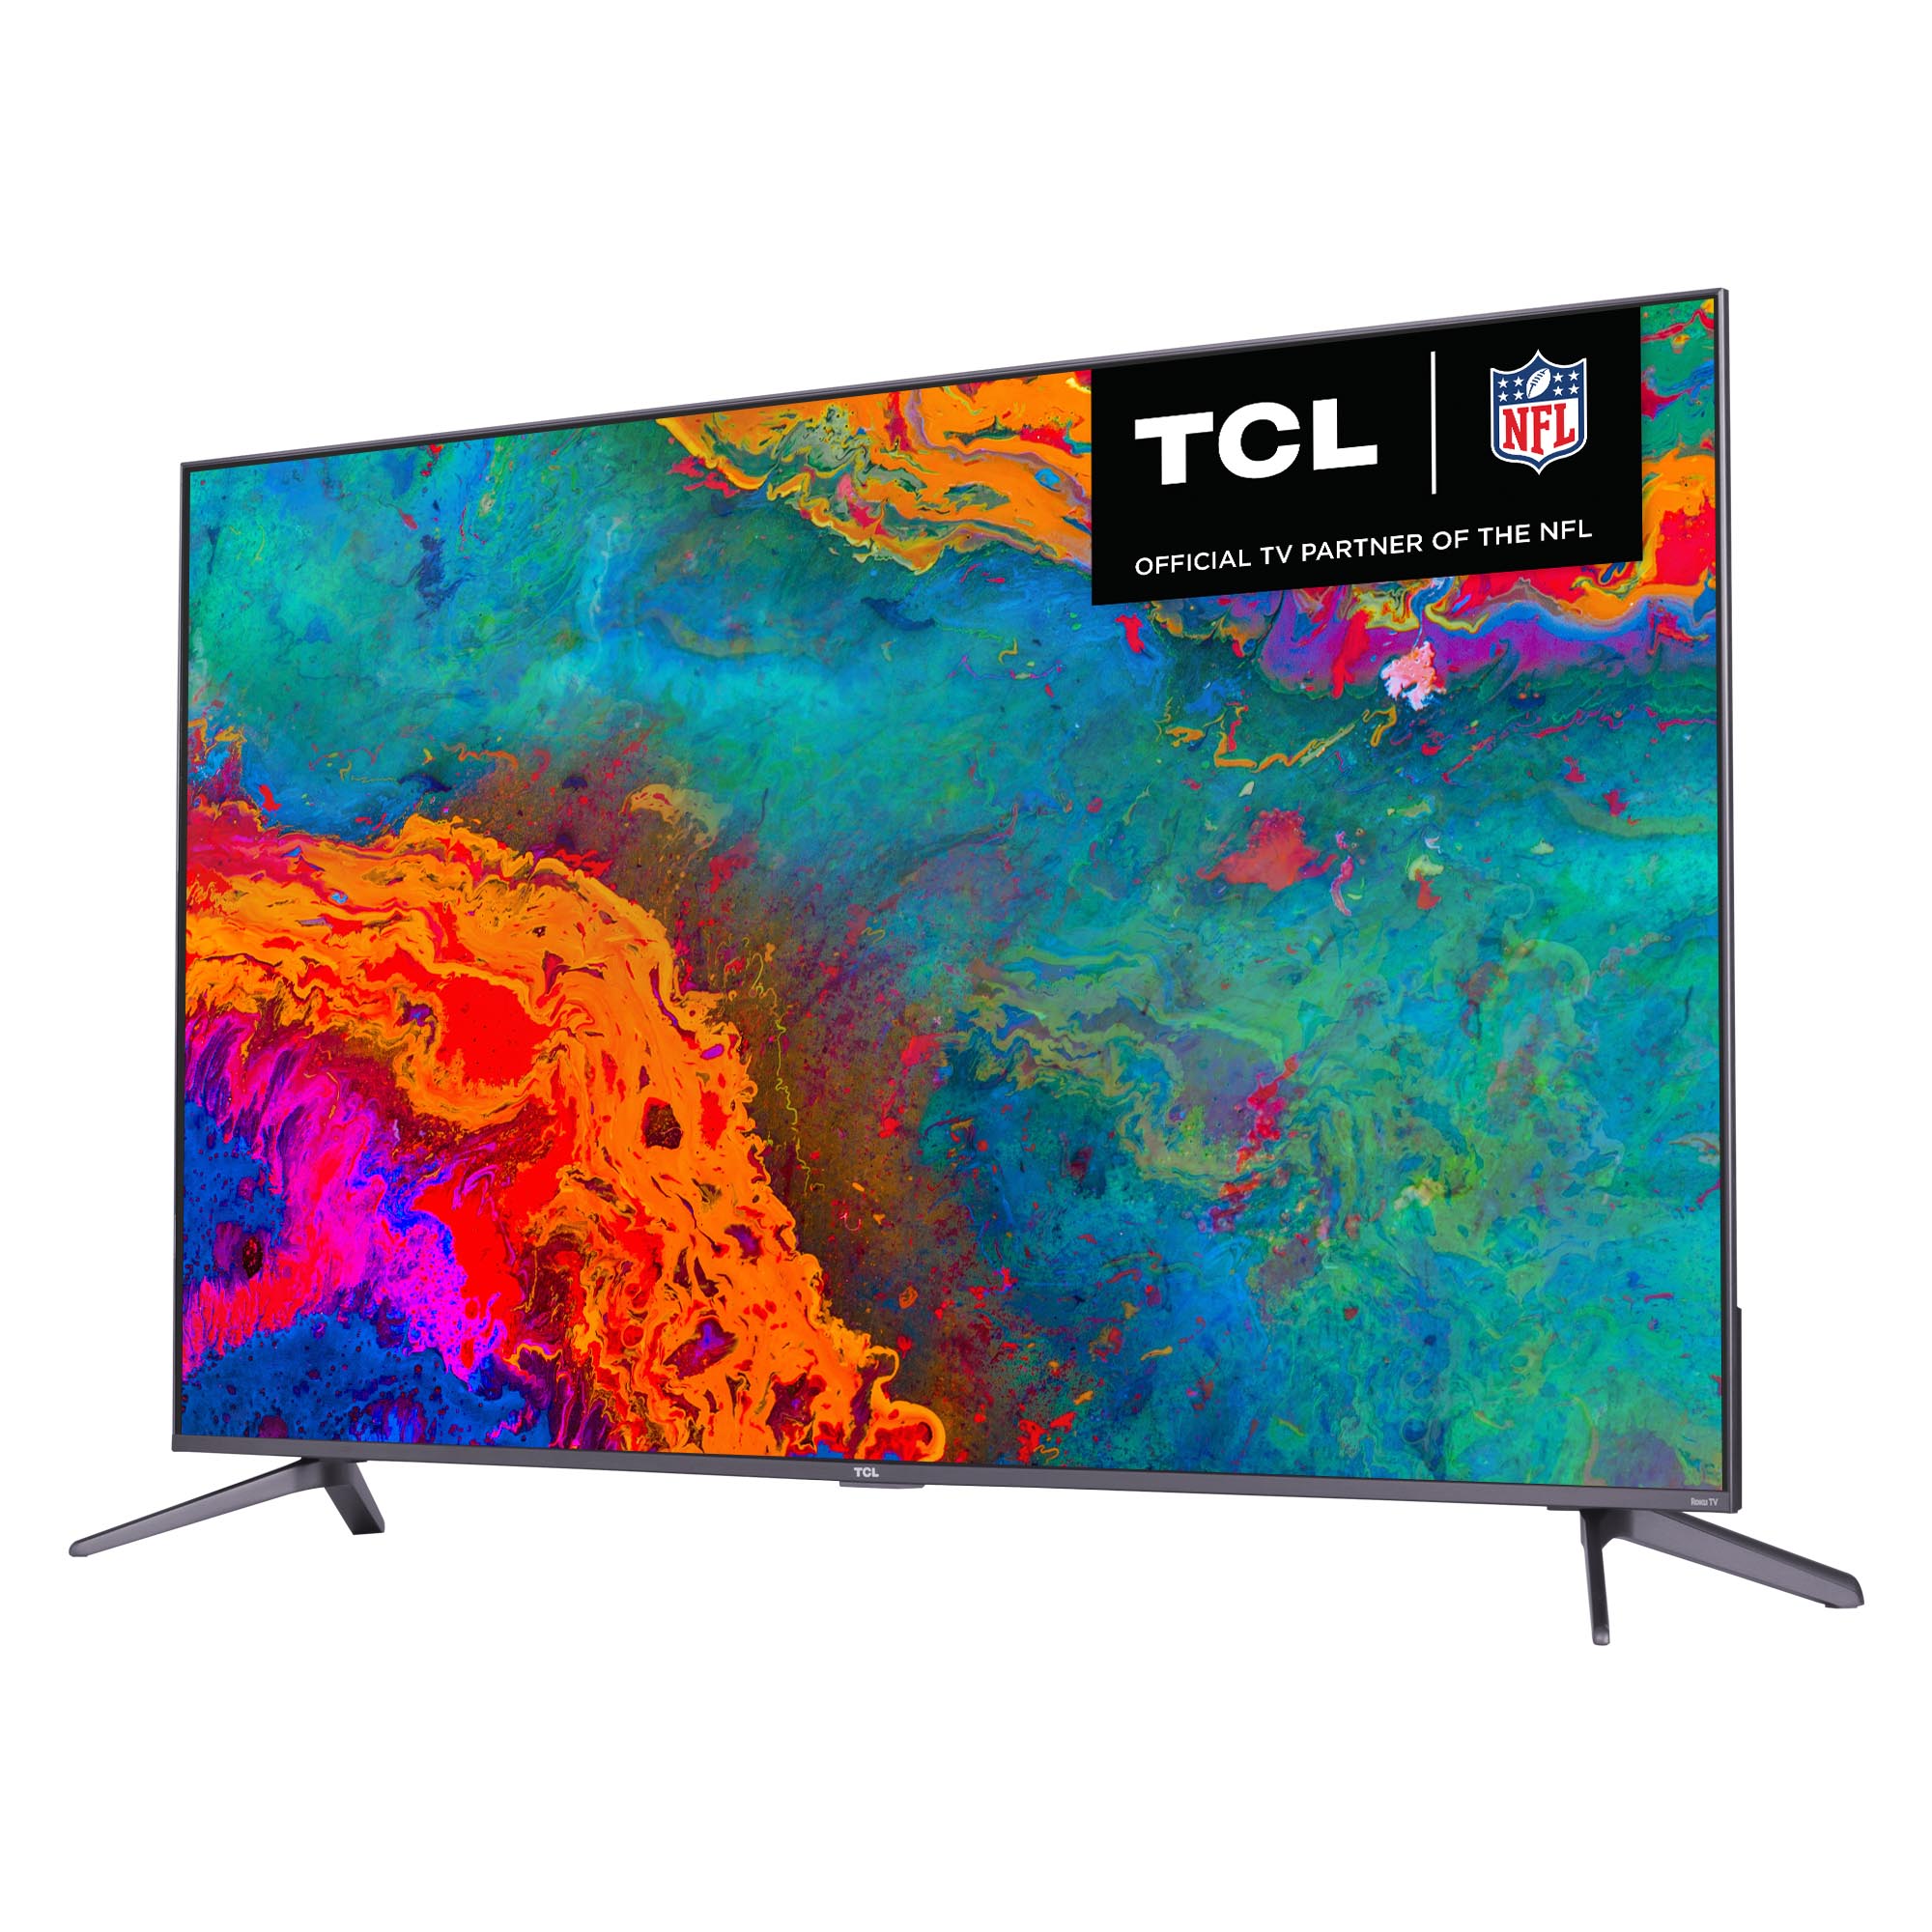 TCL 50" Class 5-Series 4K UHD Dolby Vision HDR QLED Roku Smart TV - 50S535 - image 5 of 11